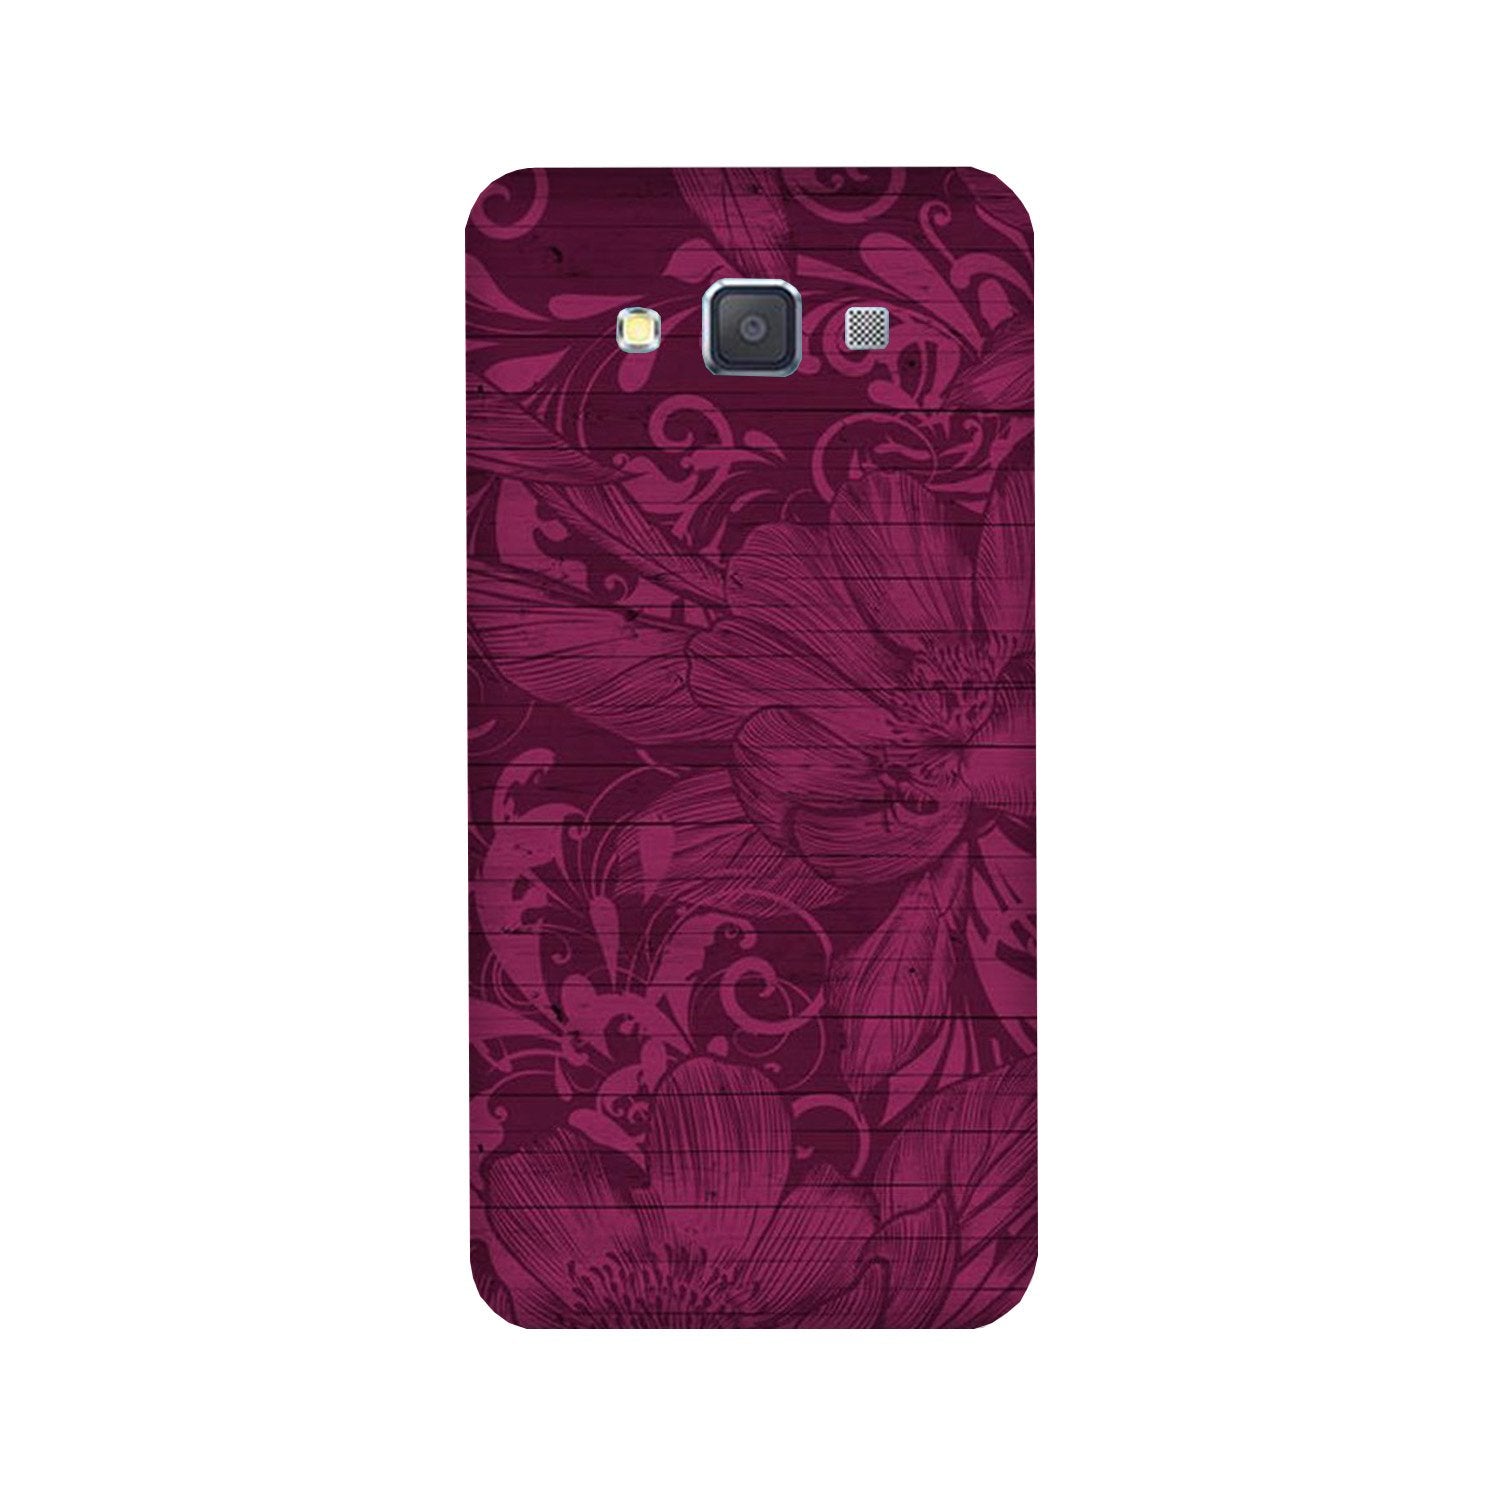 Purple Backround Case for Galaxy ON7/ON7 Pro